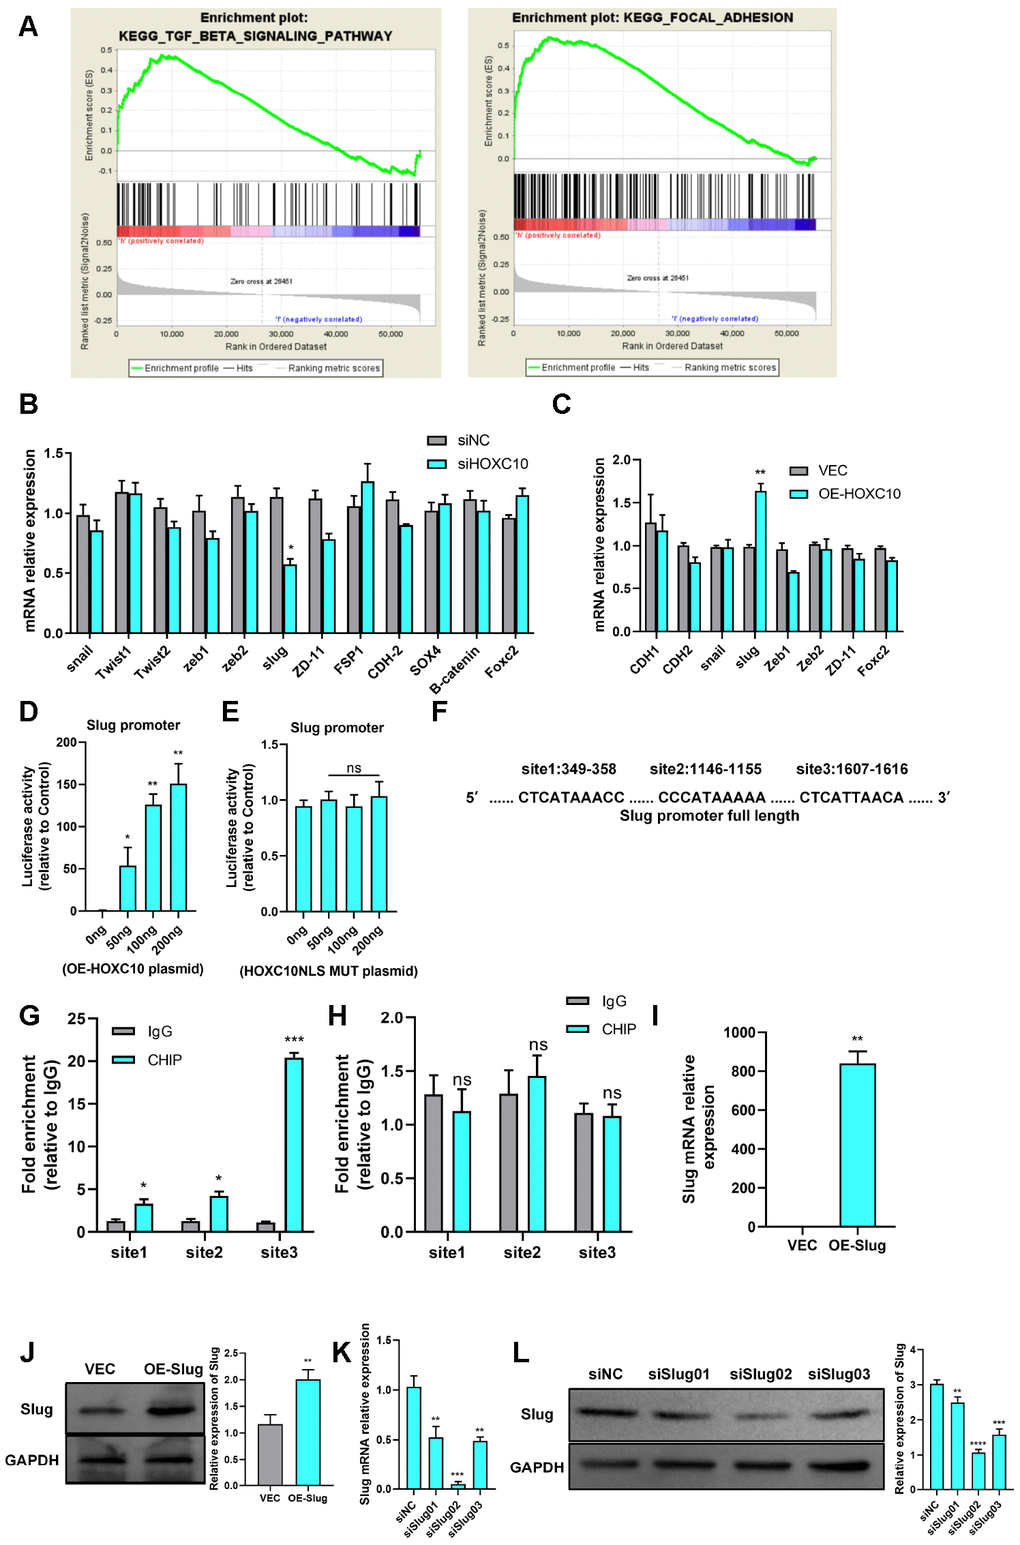 HOXC10 promotes OC cell migration by regulating Slug transcription. (A) The GSEA plot indicates that HOXC10 expression is positively correlated with TGF-β and FAK pathway signatures (OC sample data were downloaded from TCGA, n=379). (B, C) mRNA expression of EMT-related genes in 8910 cells transfected with HOXC10 siRNA, negative control siRNA, the HOXC10 overexpression plasmid, and empty vector. P=0.0257 and P=0.0093. (D) 8910 cells were cotransfected with a plasmid containing the full-length Slug promoter and increasing concentrations of the HOXC10 overexpression plasmid. P=0.0499, P=0.0032 and P=0.0079. (E) 8910 cells were cotransfected with the plasmid containing the full-length Slug promoter and increasing concentrations of the HOXC10 NLS mutation plasmid. P=0.1005, P=0.9559 and P=0.4059. (F) Schematic diagram of three predicted HOXC10 binding sites in the Slug promoter region. (G) Relative fold enrichment for IgG at the three predicted binding sites, as evaluated by ChIP-qPCR. P=0.0162, P=0.0158 and P=0.0003. (H) Relative fold enrichment for IgG at the three predicted binding sites after deletion of the HOXC10 DNA binding sites. P=0.5259, P=0.3579 and P=0.8293. (I, J) Relative mRNA and protein expression levels of Slug in 8910 cells transfected with the Slug overexpression plasmid and empty vector. P=0.0018, P=0.0044. (K–L) Transfection efficiencies of the Slug siRNA products. P=0.0048, P=0.0001, and P=0.0013; P=0.0083, P